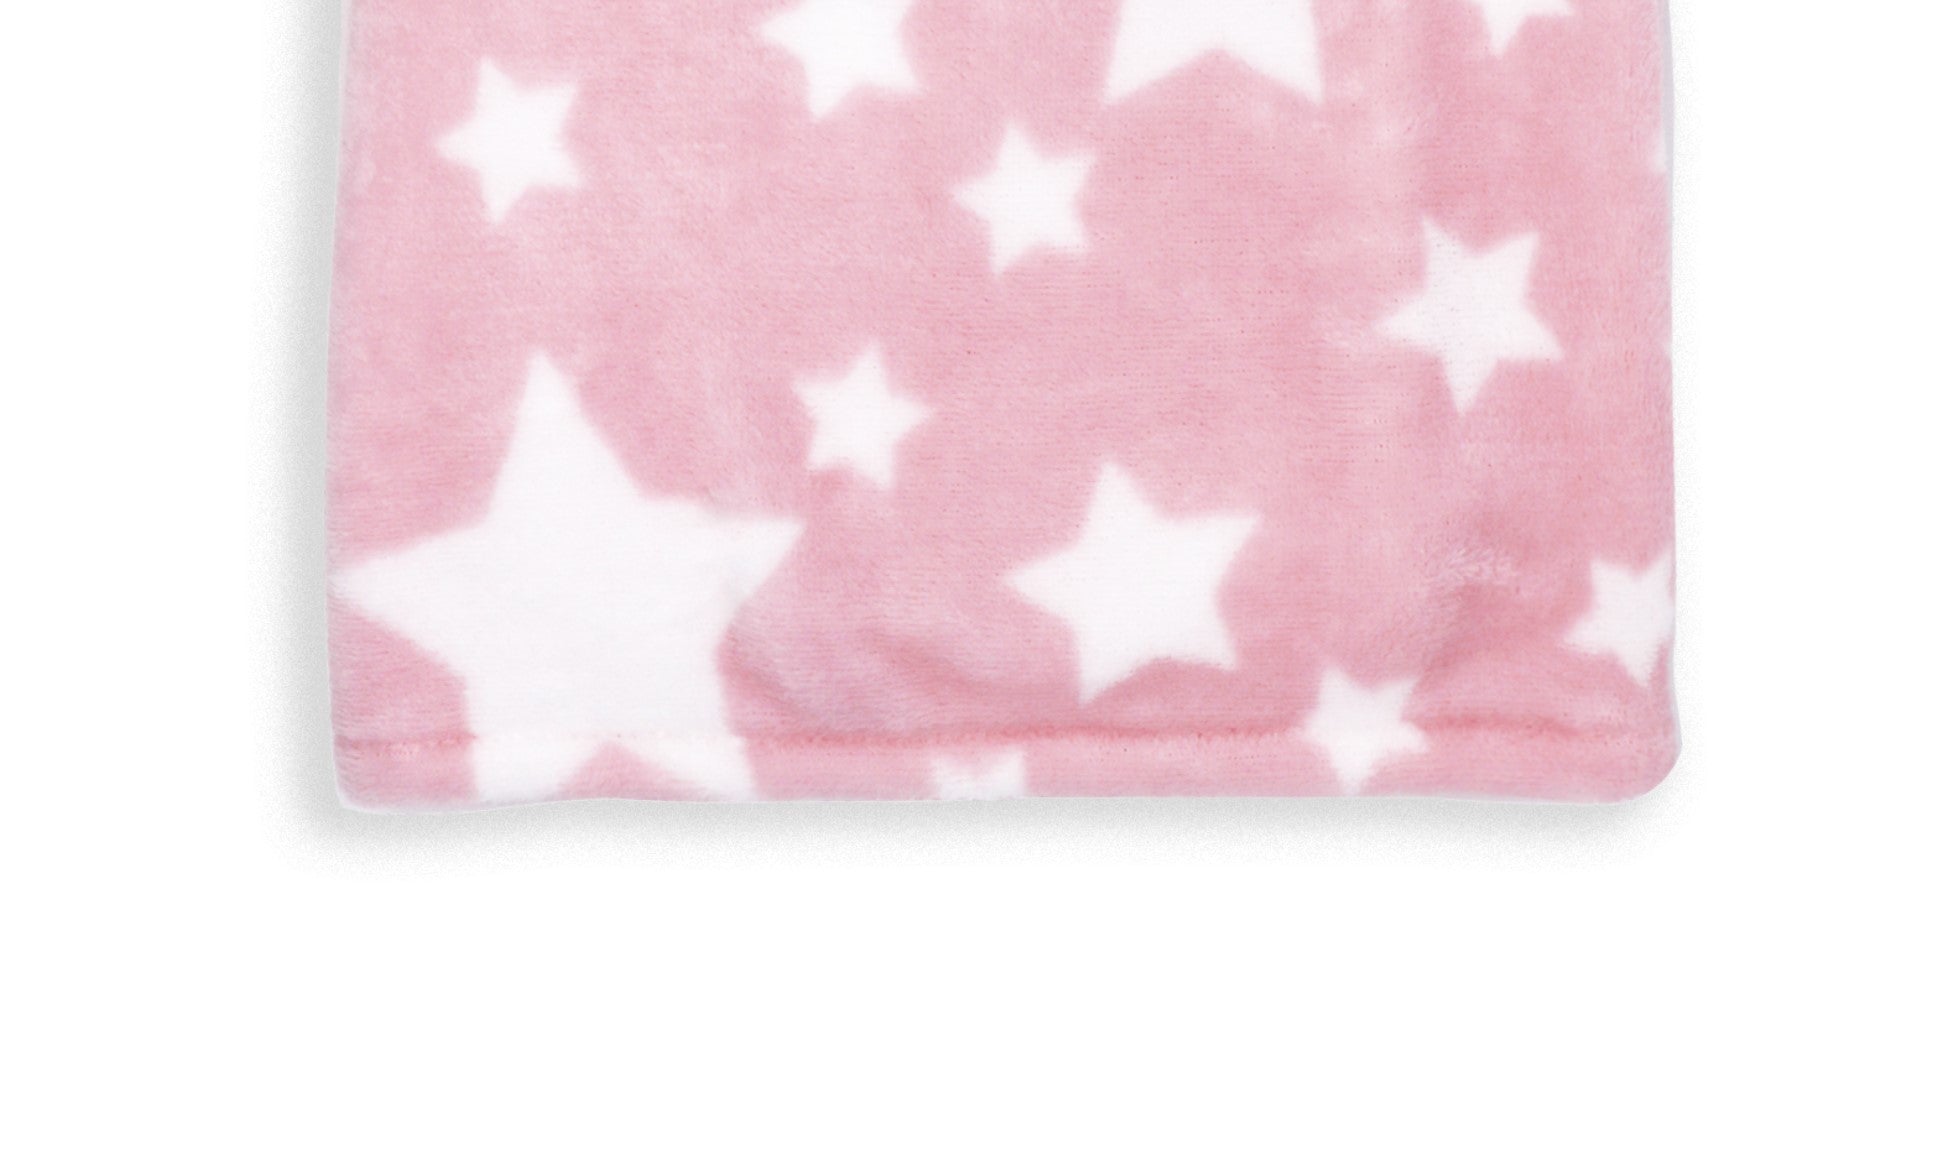 Stars Flannel Fleece Baby Blanket, 30 x 36 in, White & Pink Color